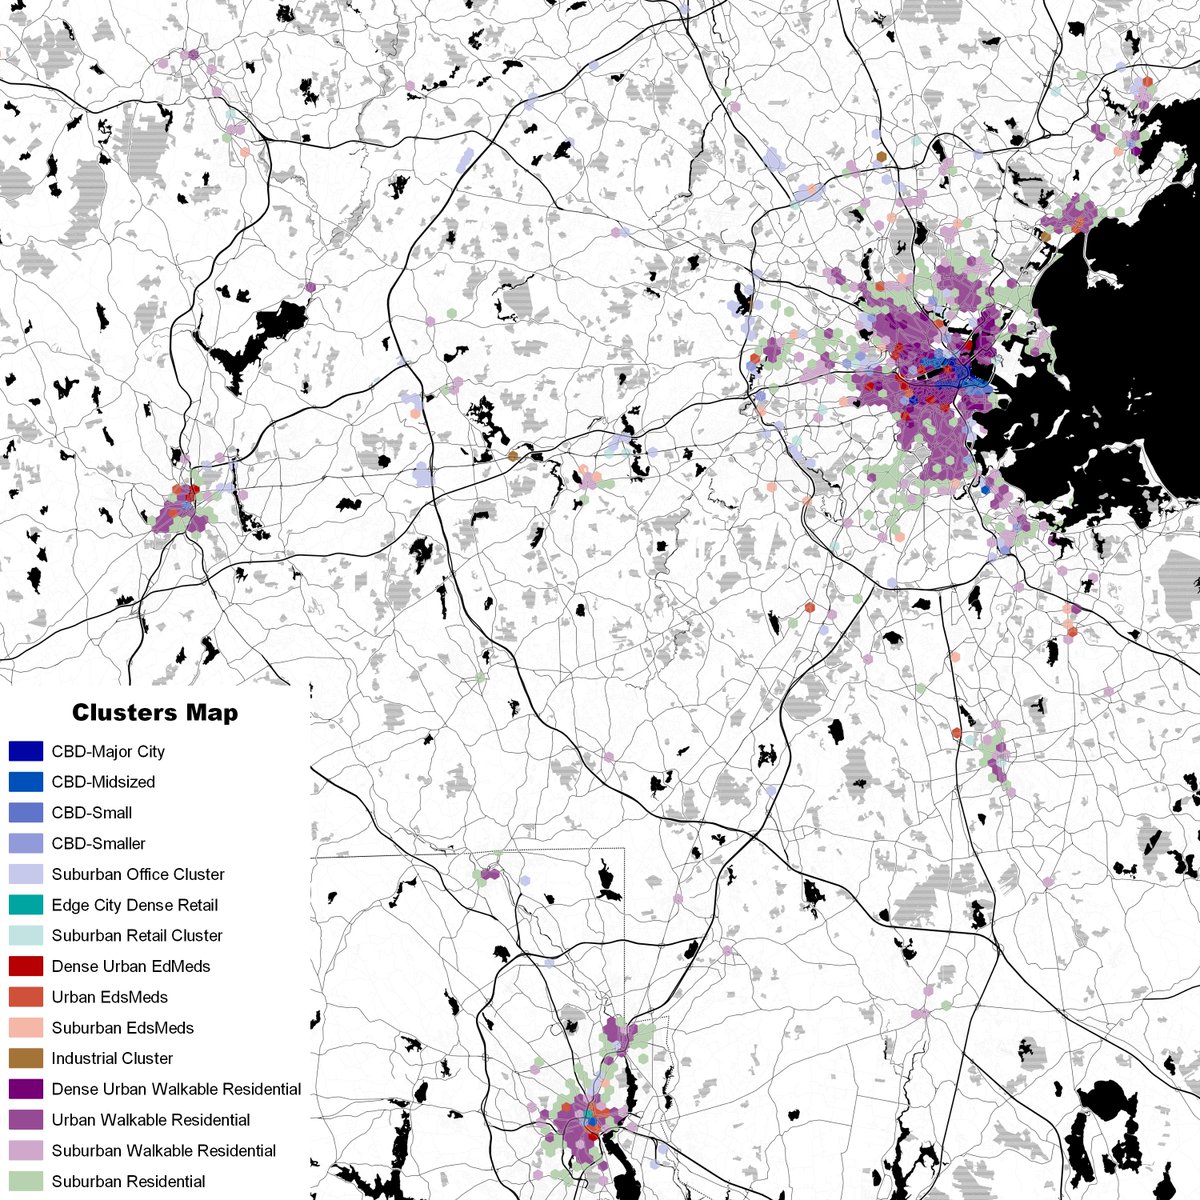 Boston and---surprisingly to me, Providence---have rather more in the way of urban cores, though Boston's ring of mill town suburbs that deserve better commuter rail service are mostly off the map.